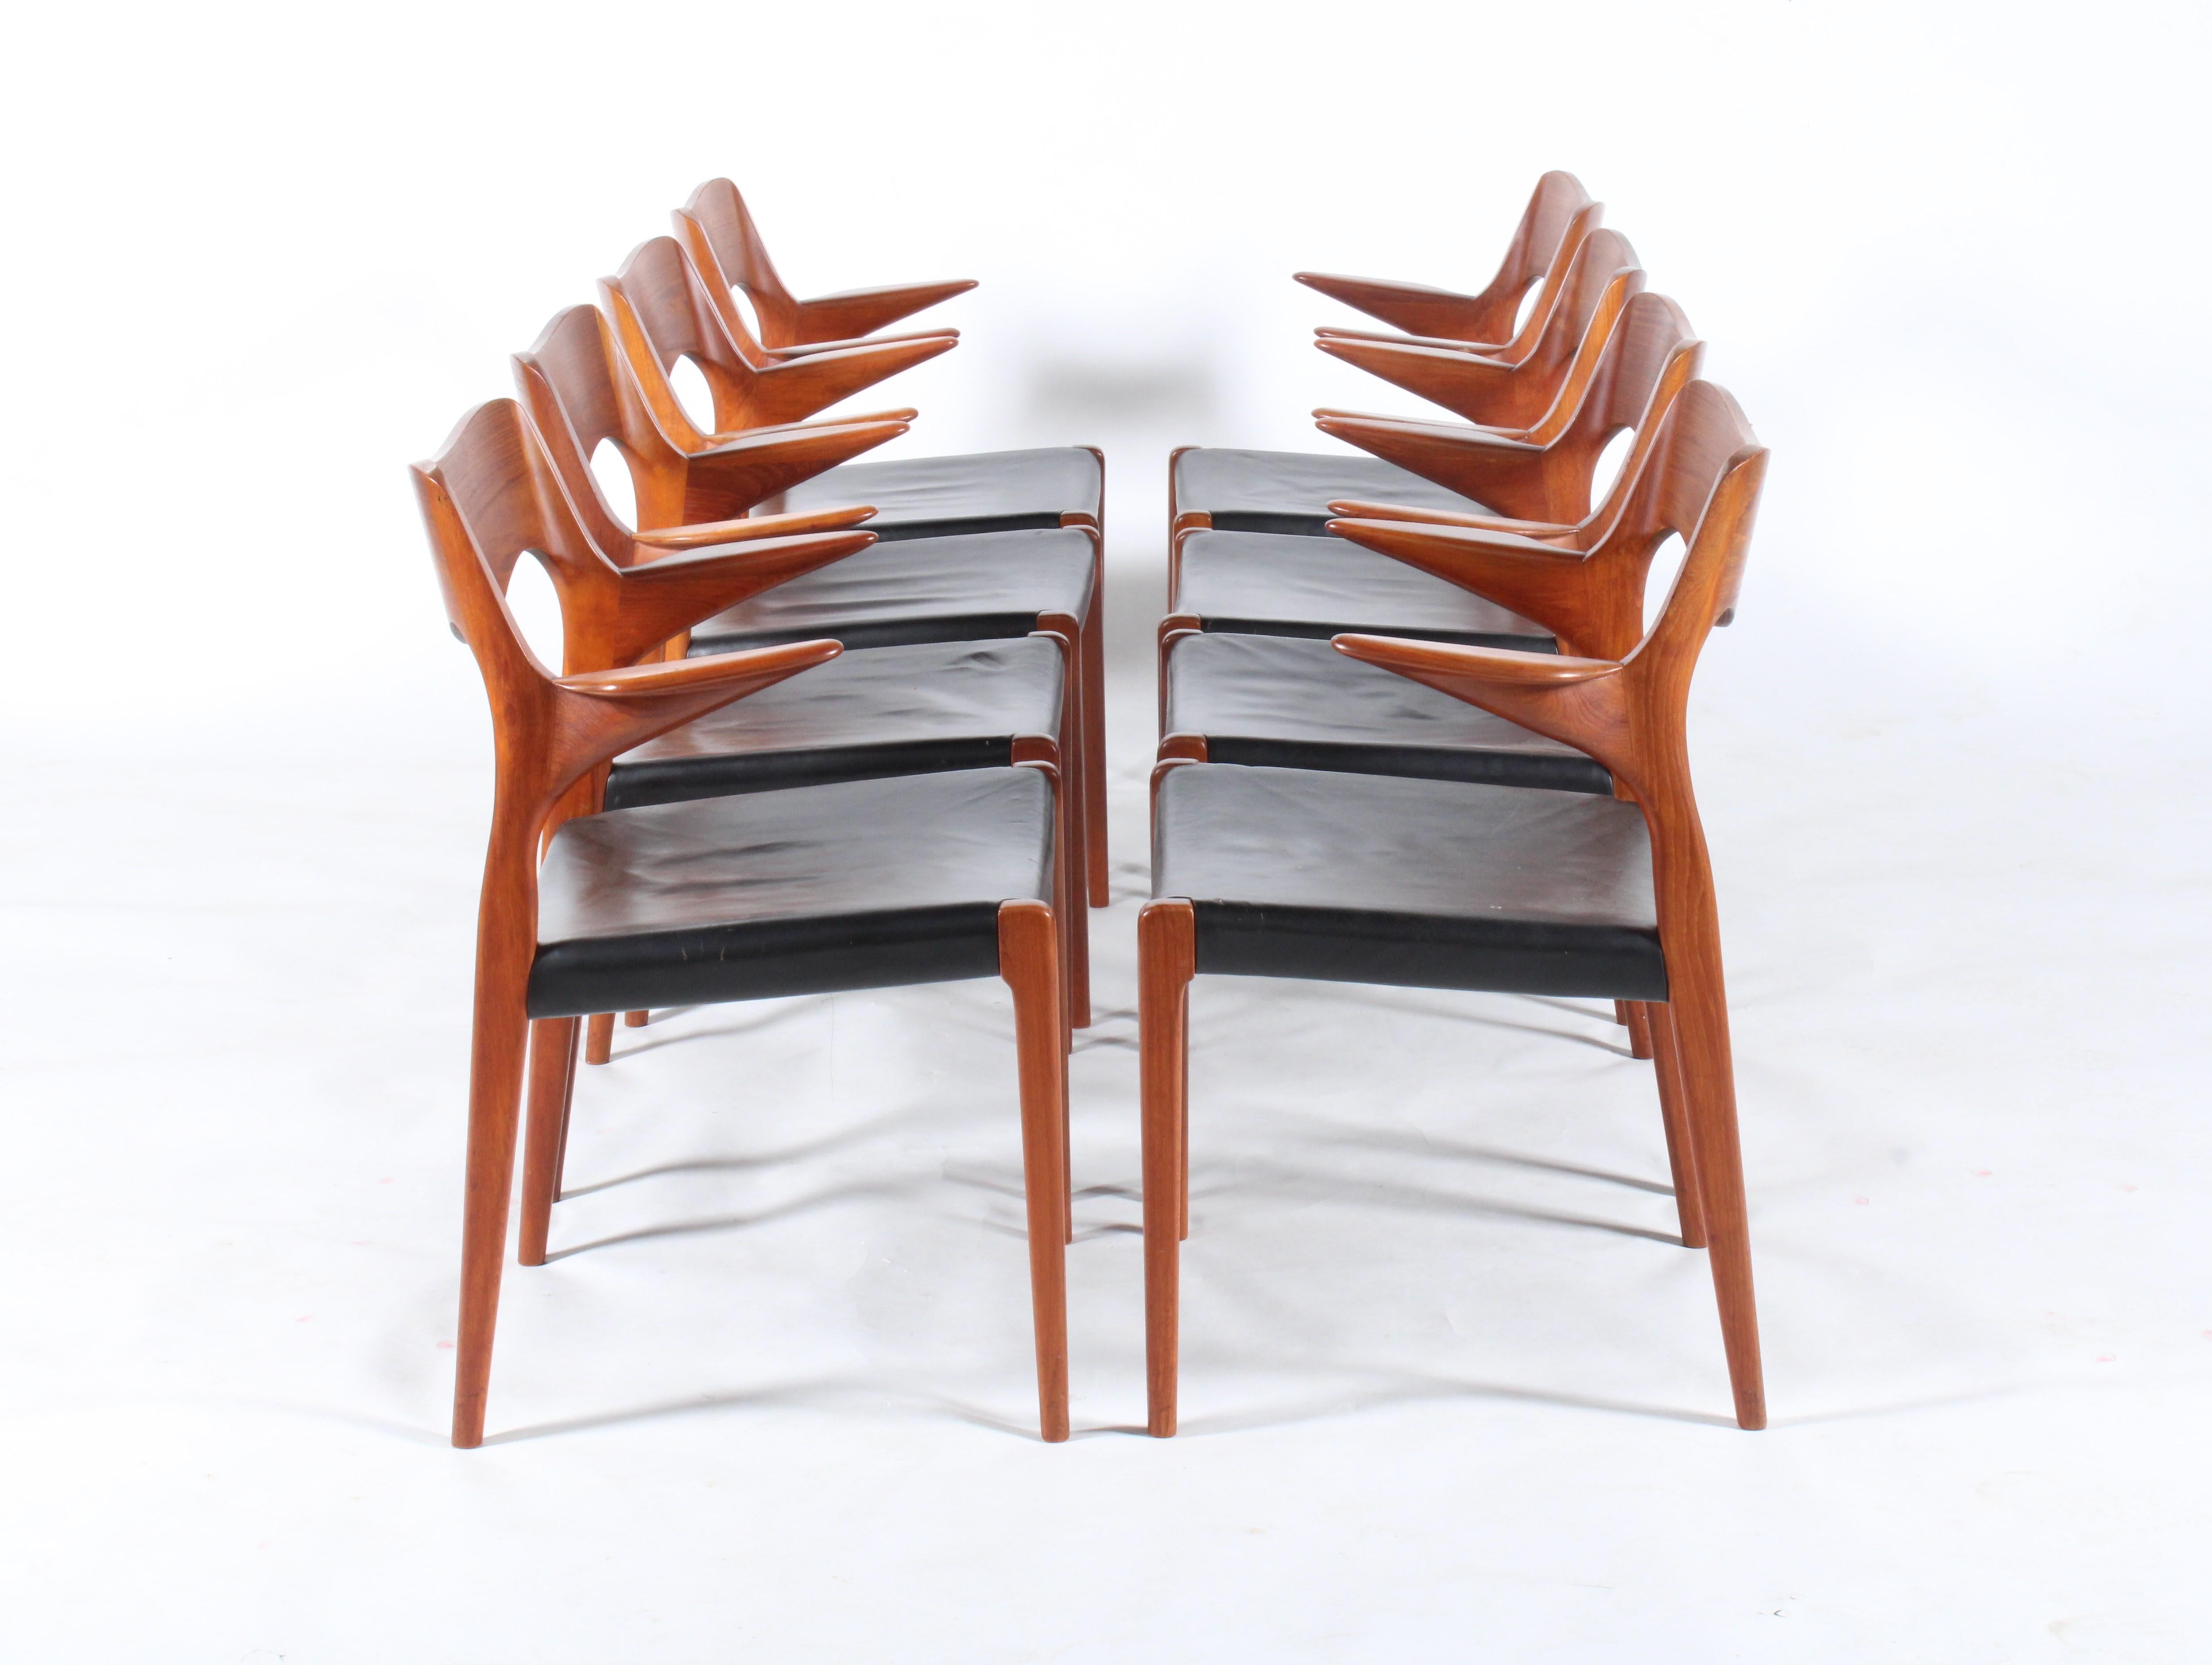 An incredibly rare and beautiful set of eight Model 55 dining chairs by legendary Danish design icon Niels Otto Moller. This wonderful set are offered in superb untouched vintage condition and all have their original vinyl seat covering . Over the